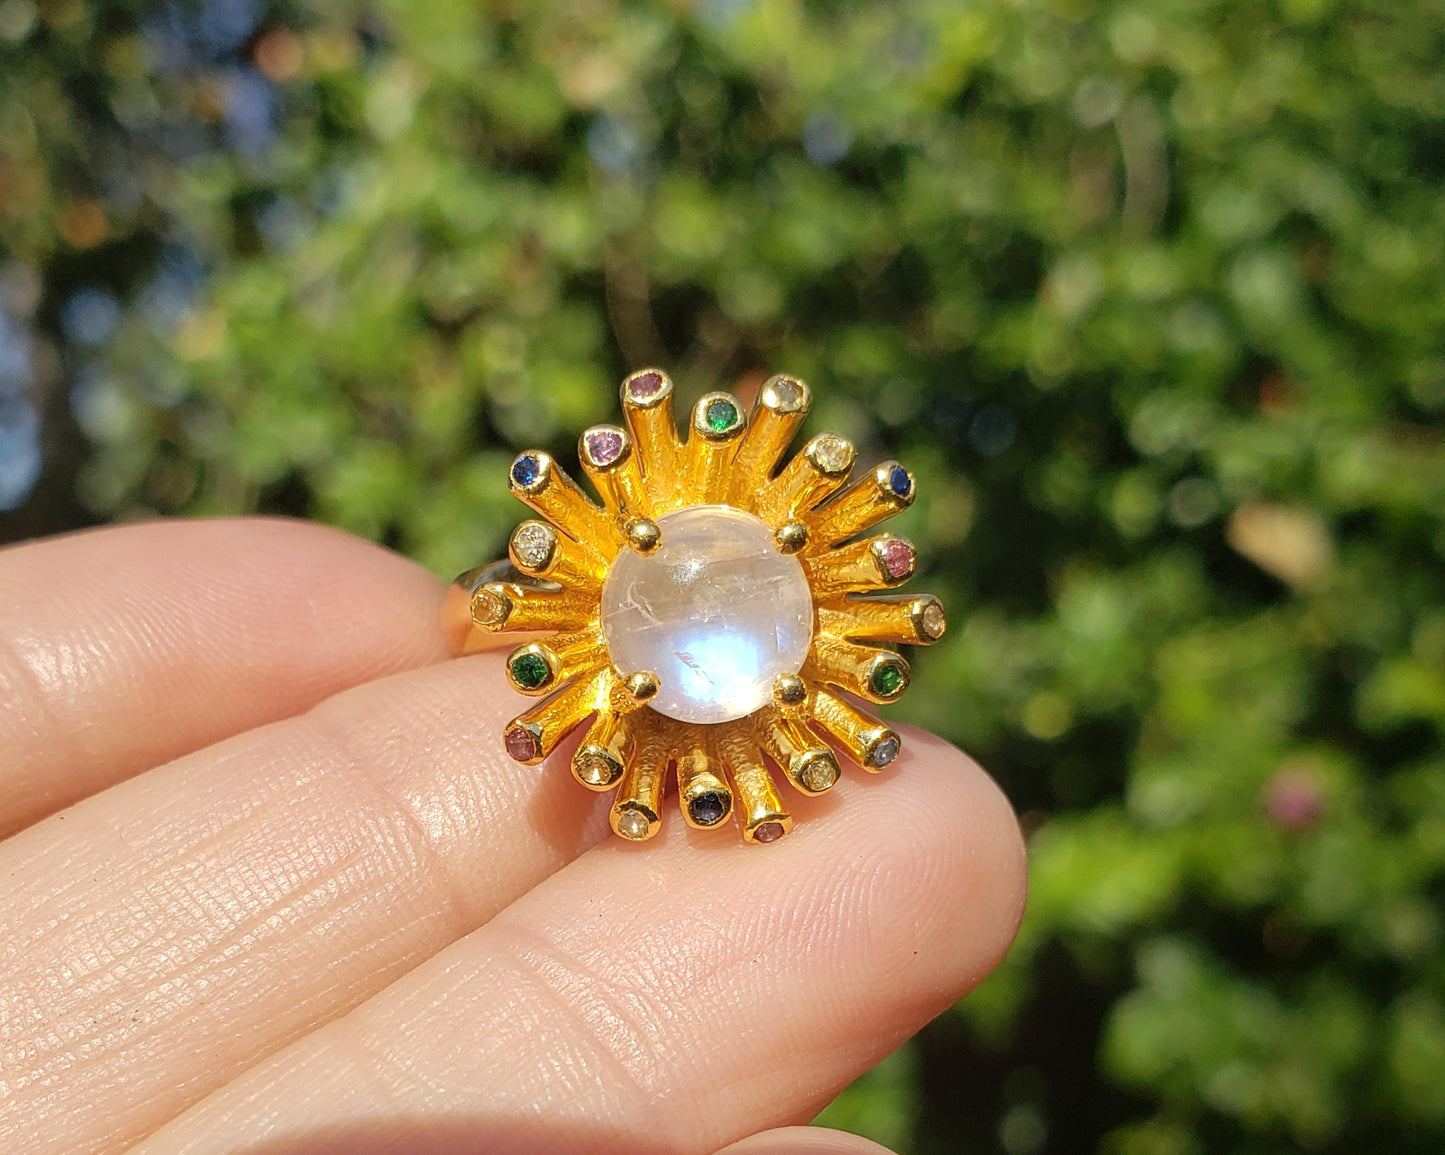 Moonstone Ring - 24k Gold Plated - Adjustable Size #277